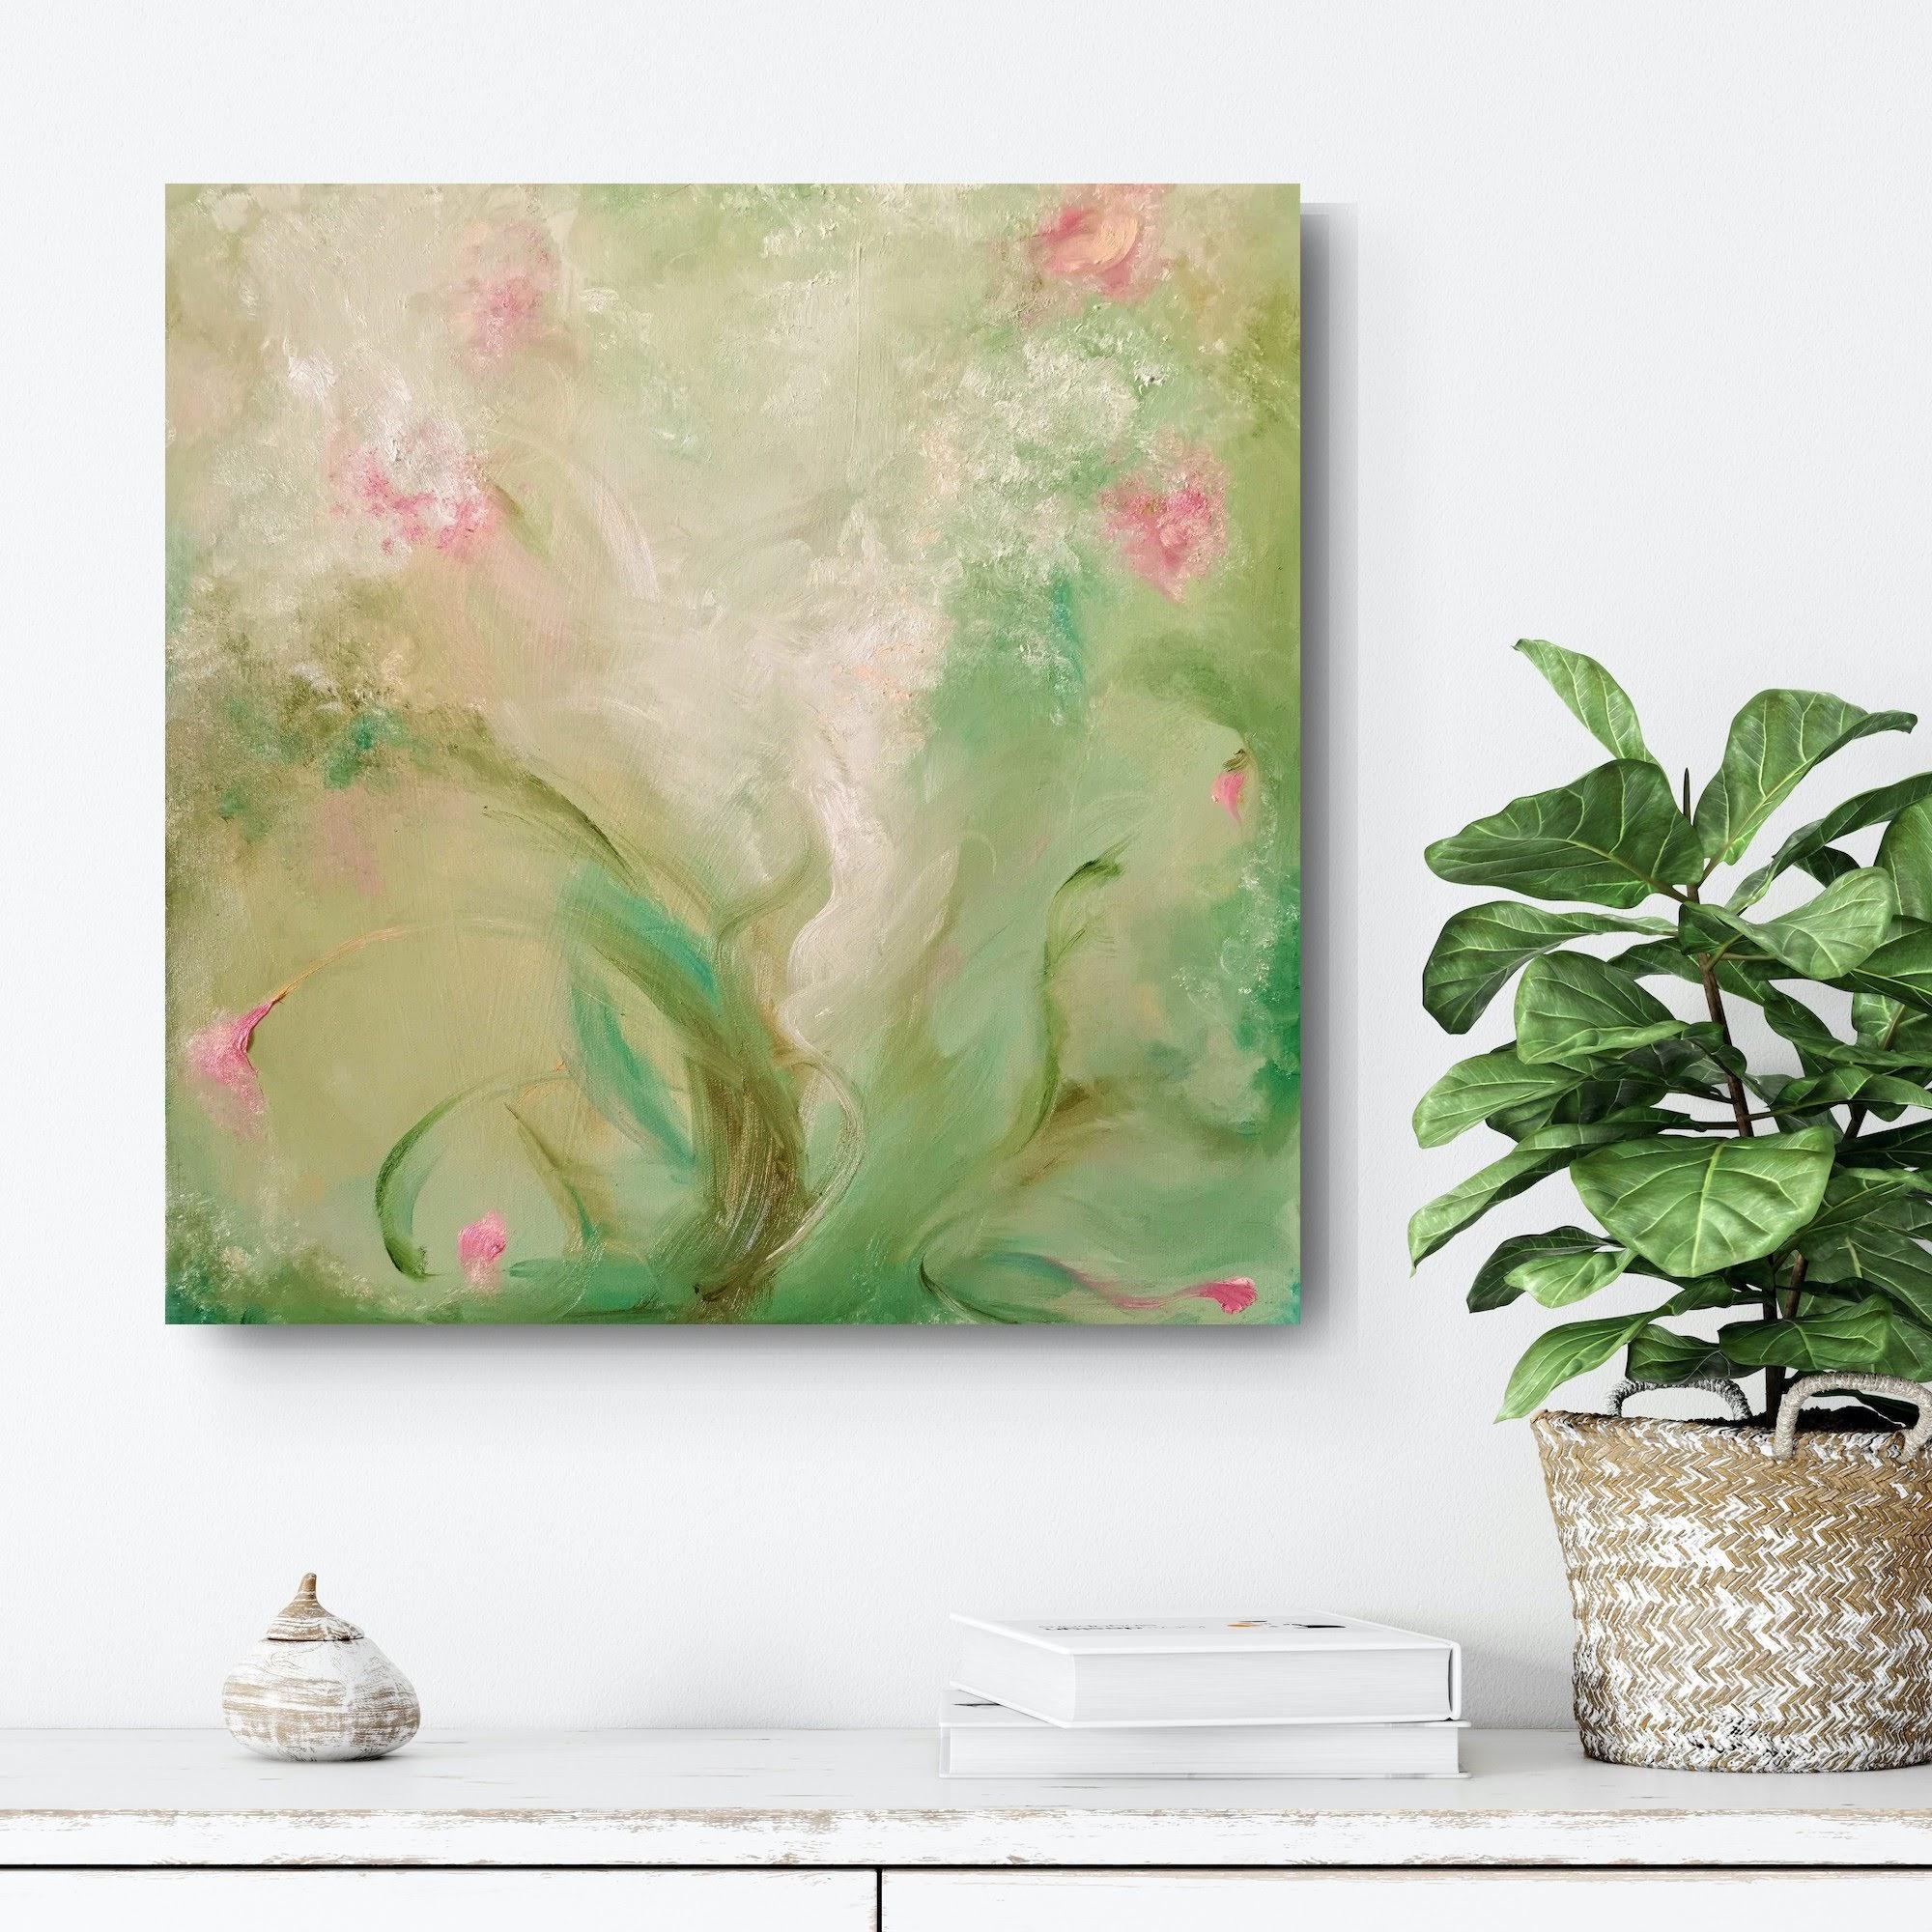 A most verdant spring - Whimsical green and pink abstract painting 3